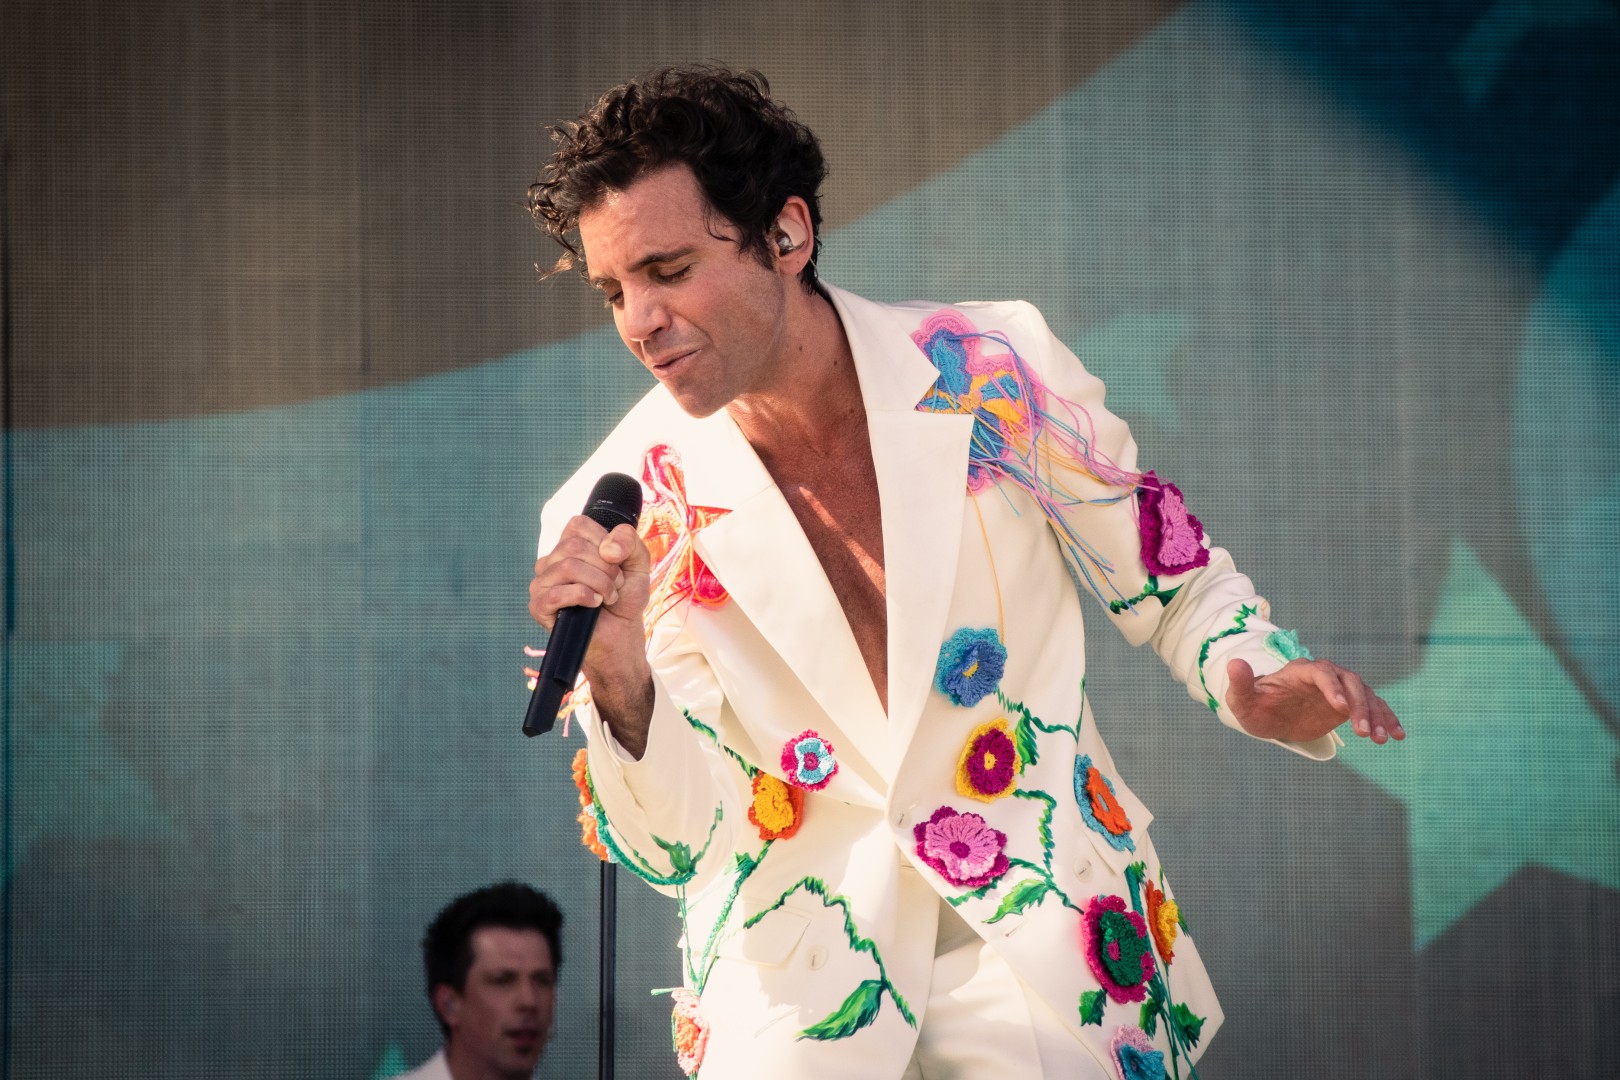 MIKA at Empire Polo Club in Indio on April 15, 2022 (3fde55d058)